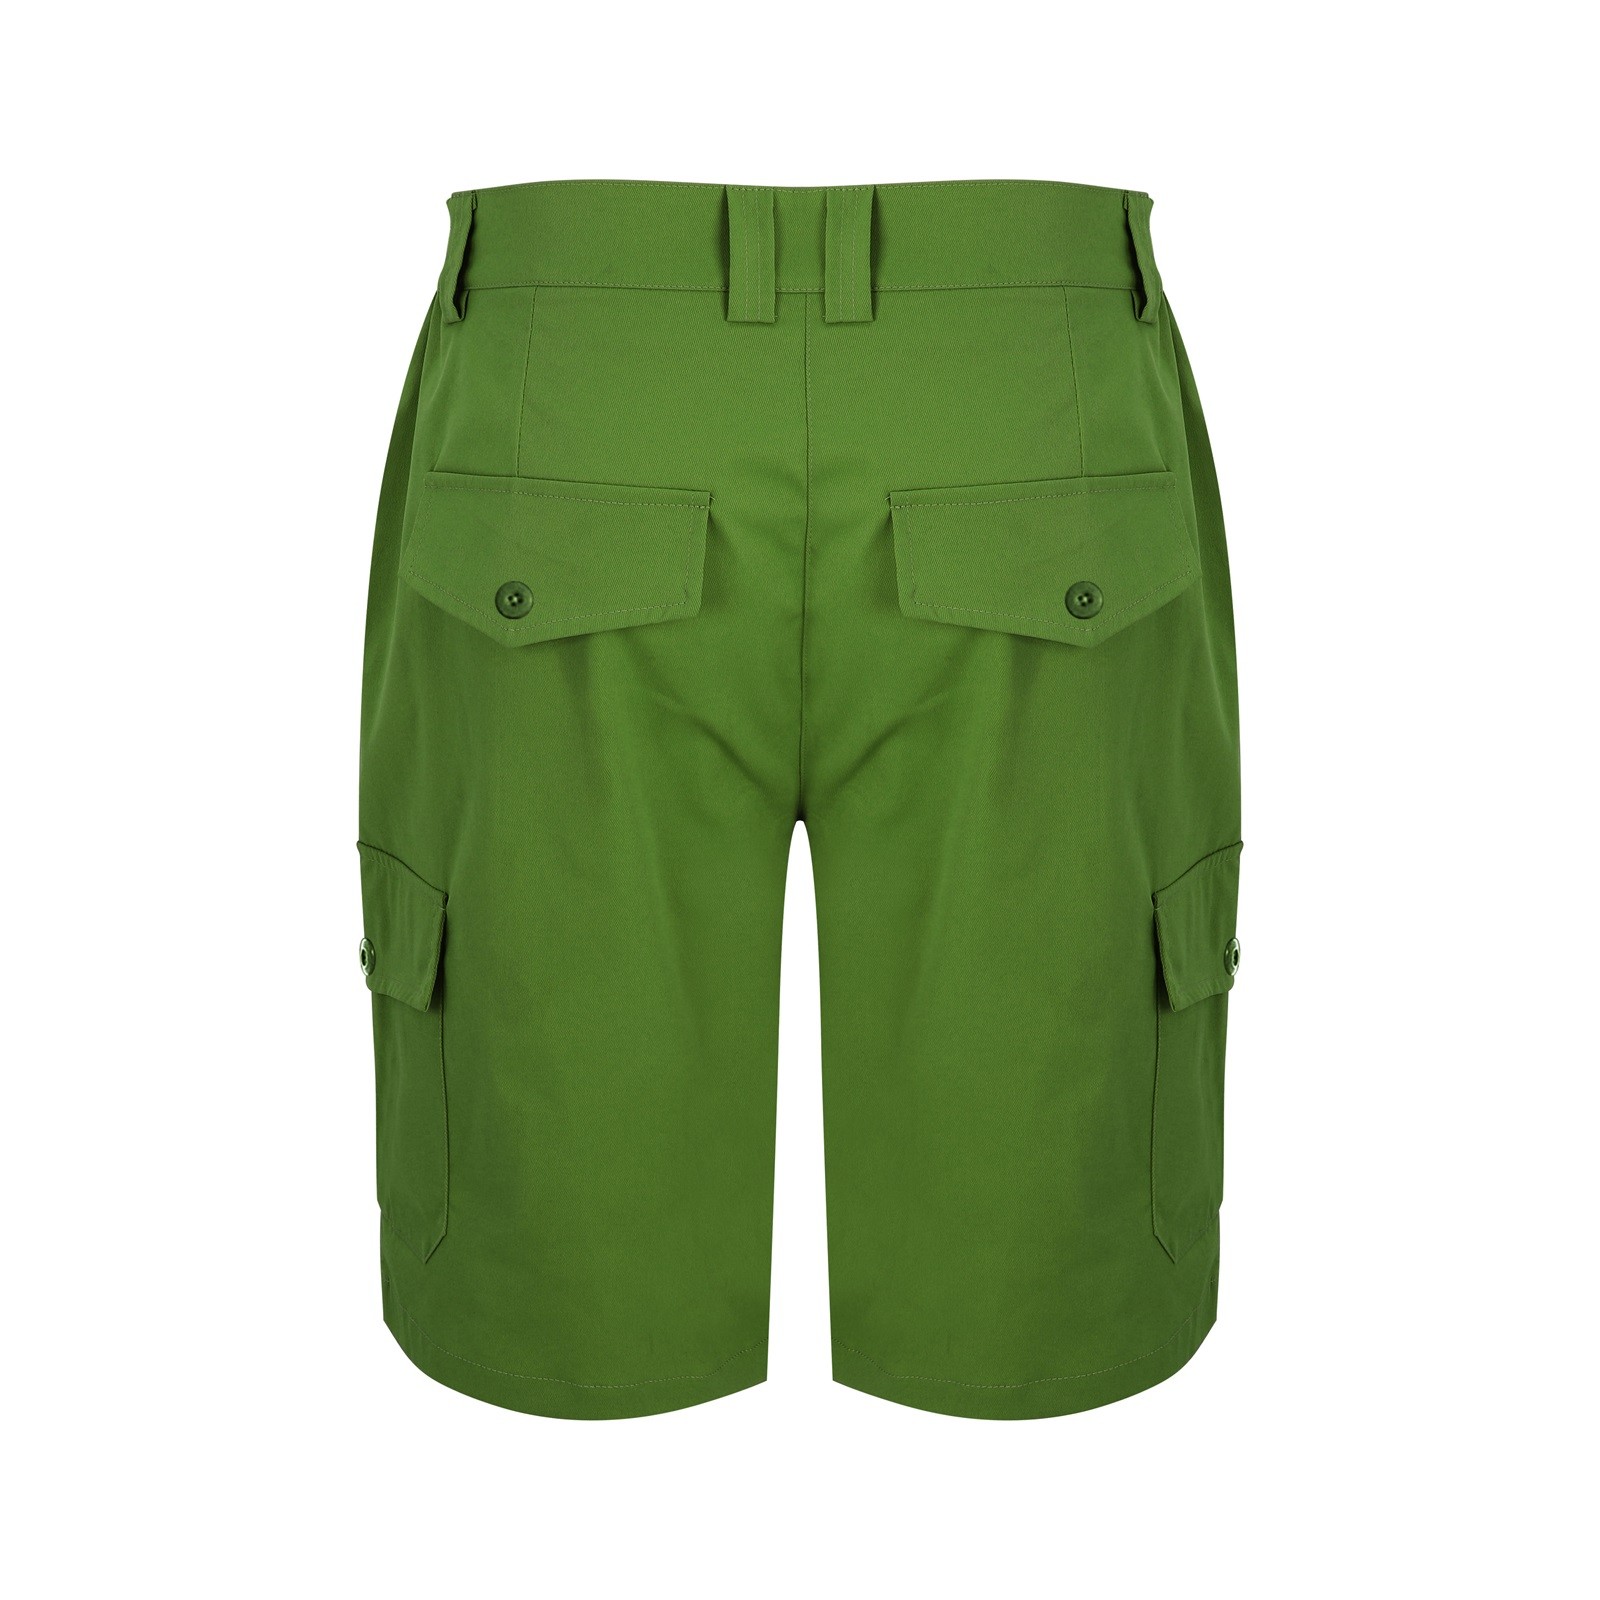 Cargo Pants for Men Summer Shorts with Multiple Pockets for Comfort and ...